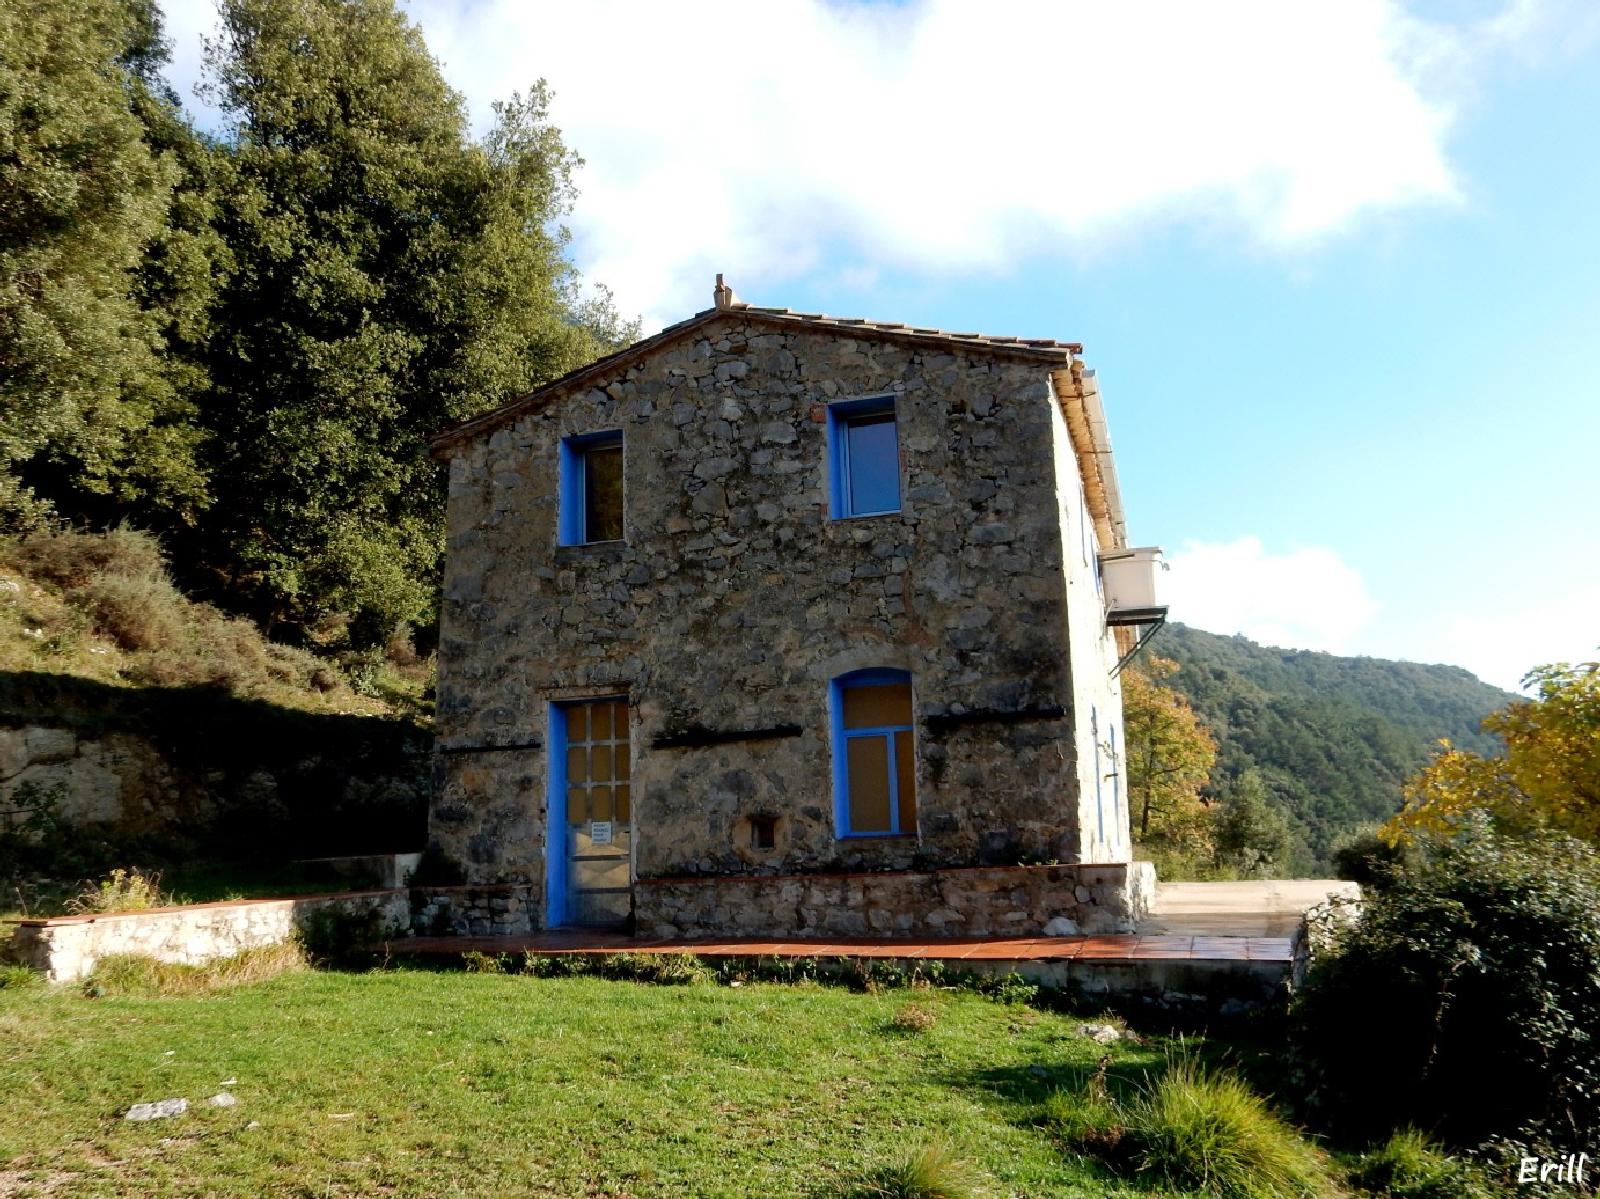 Property with 521 hectares and 3 farmhouses in good condition